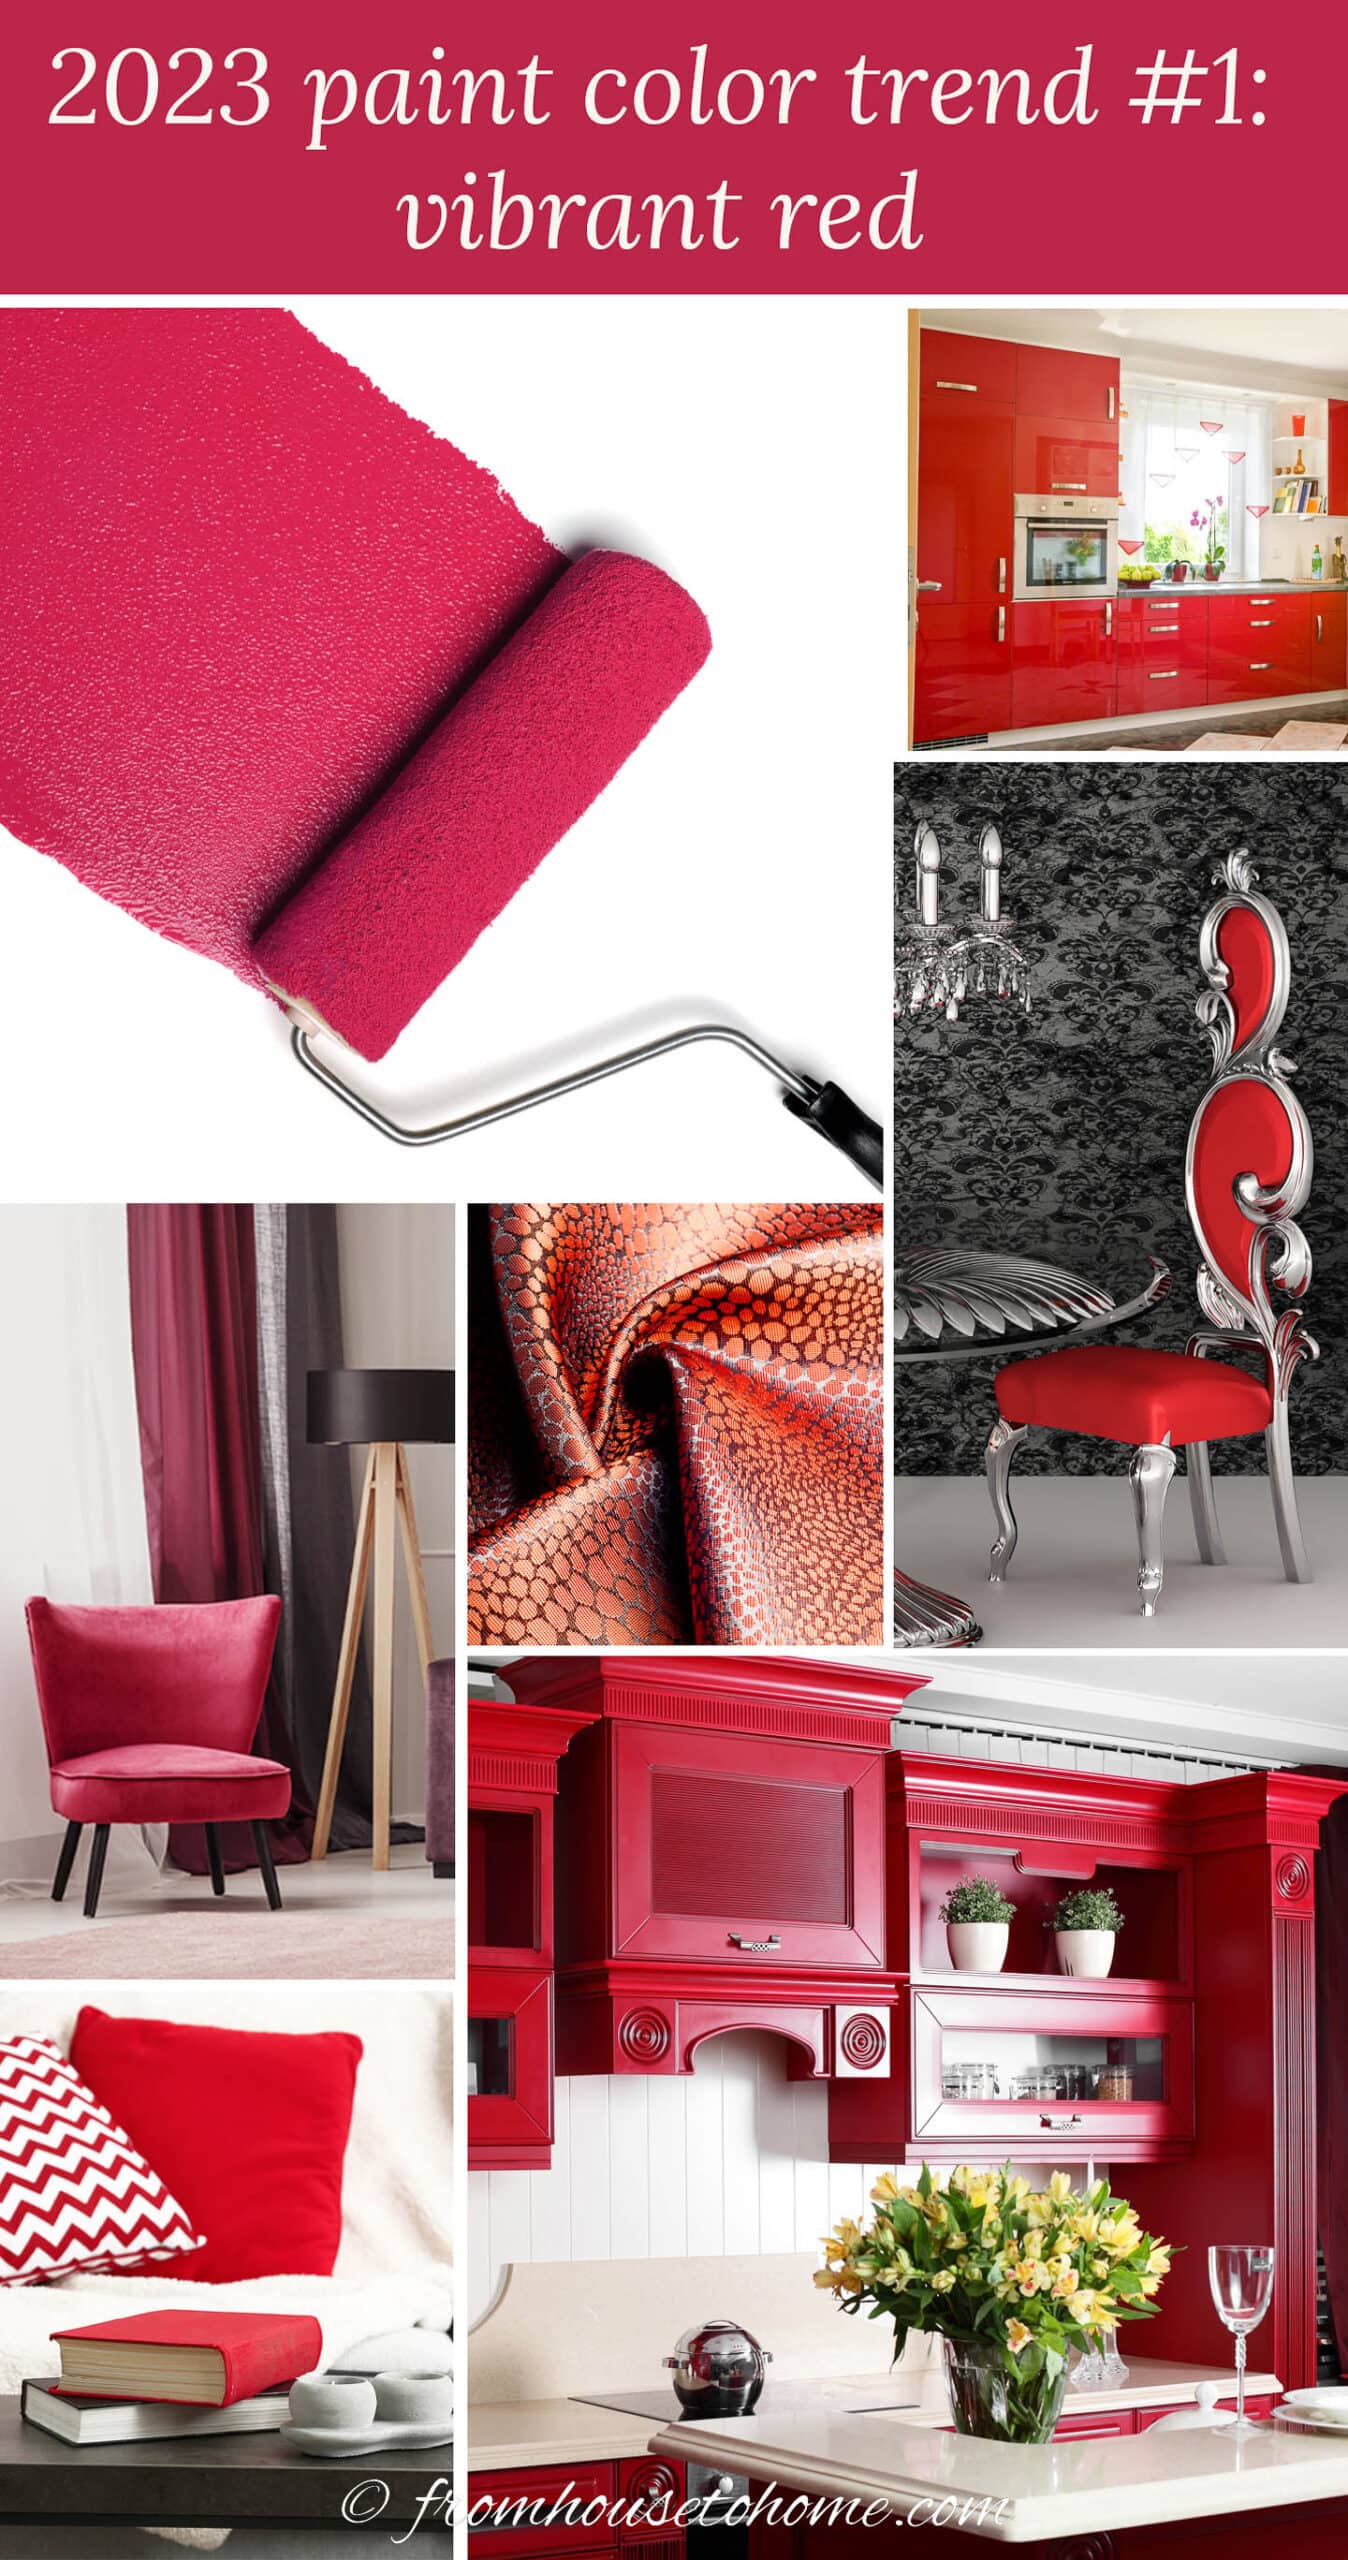 A collage of interior images using vibrant red paint and furnishings